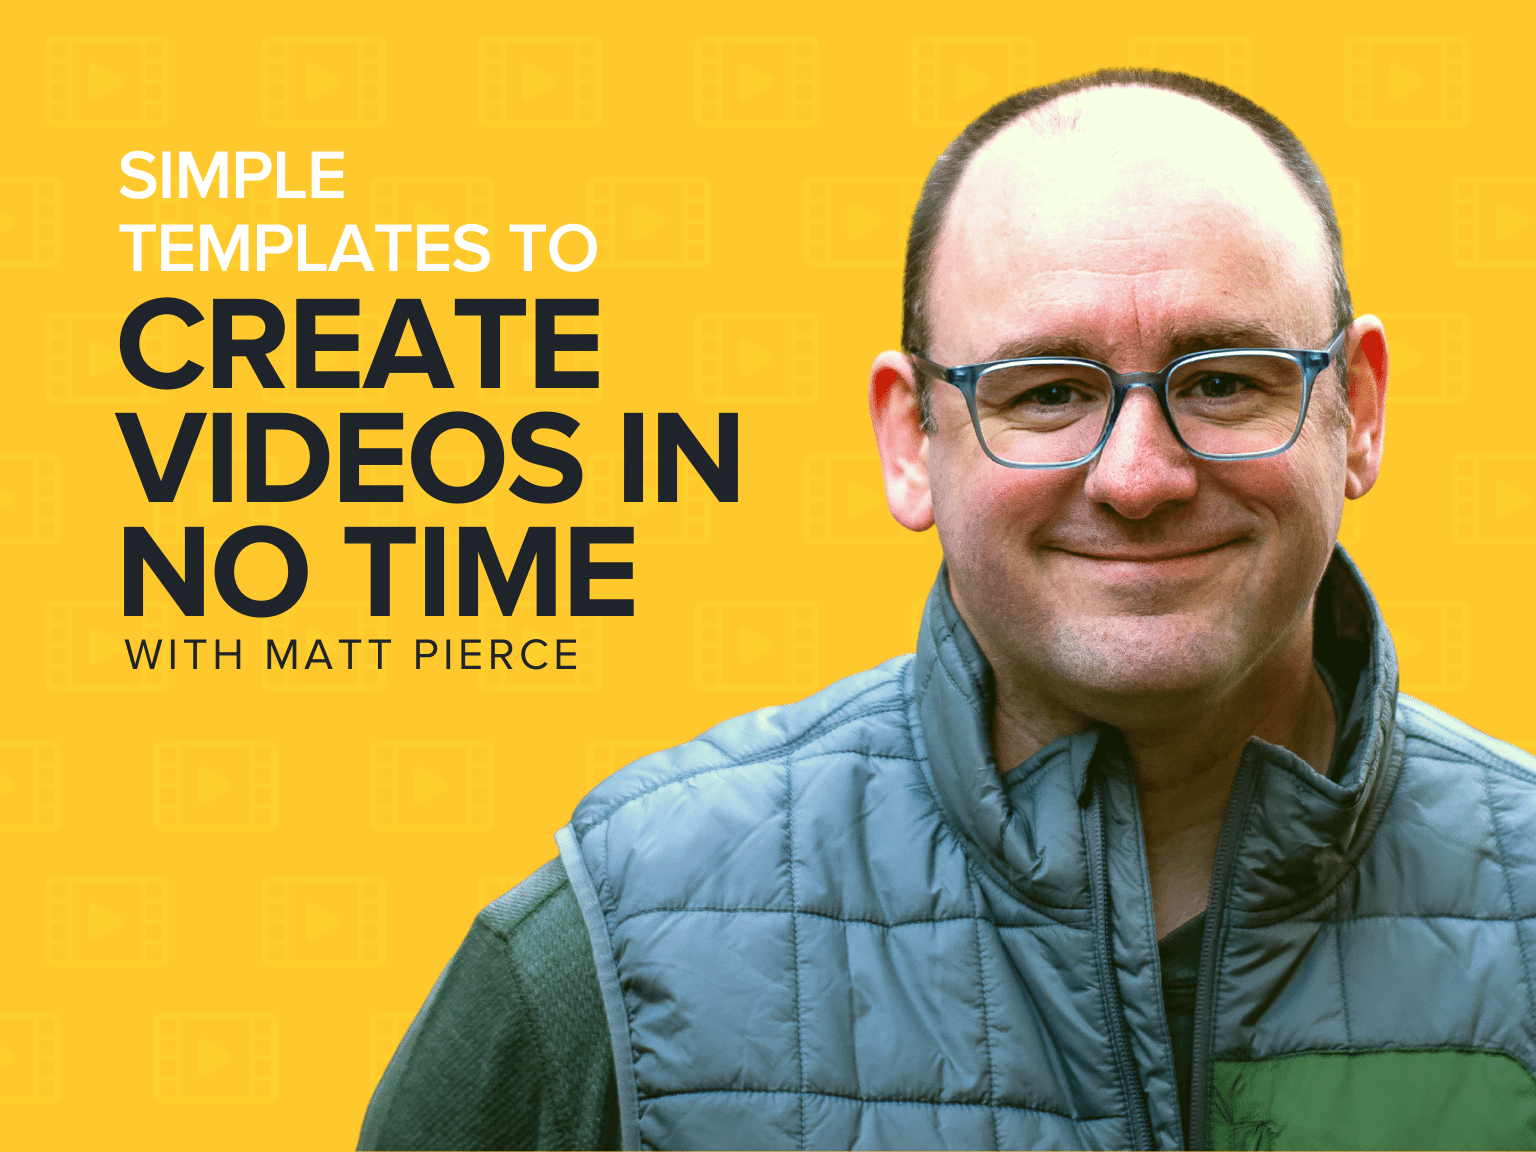 Simple Templates to Create Videos in No Time